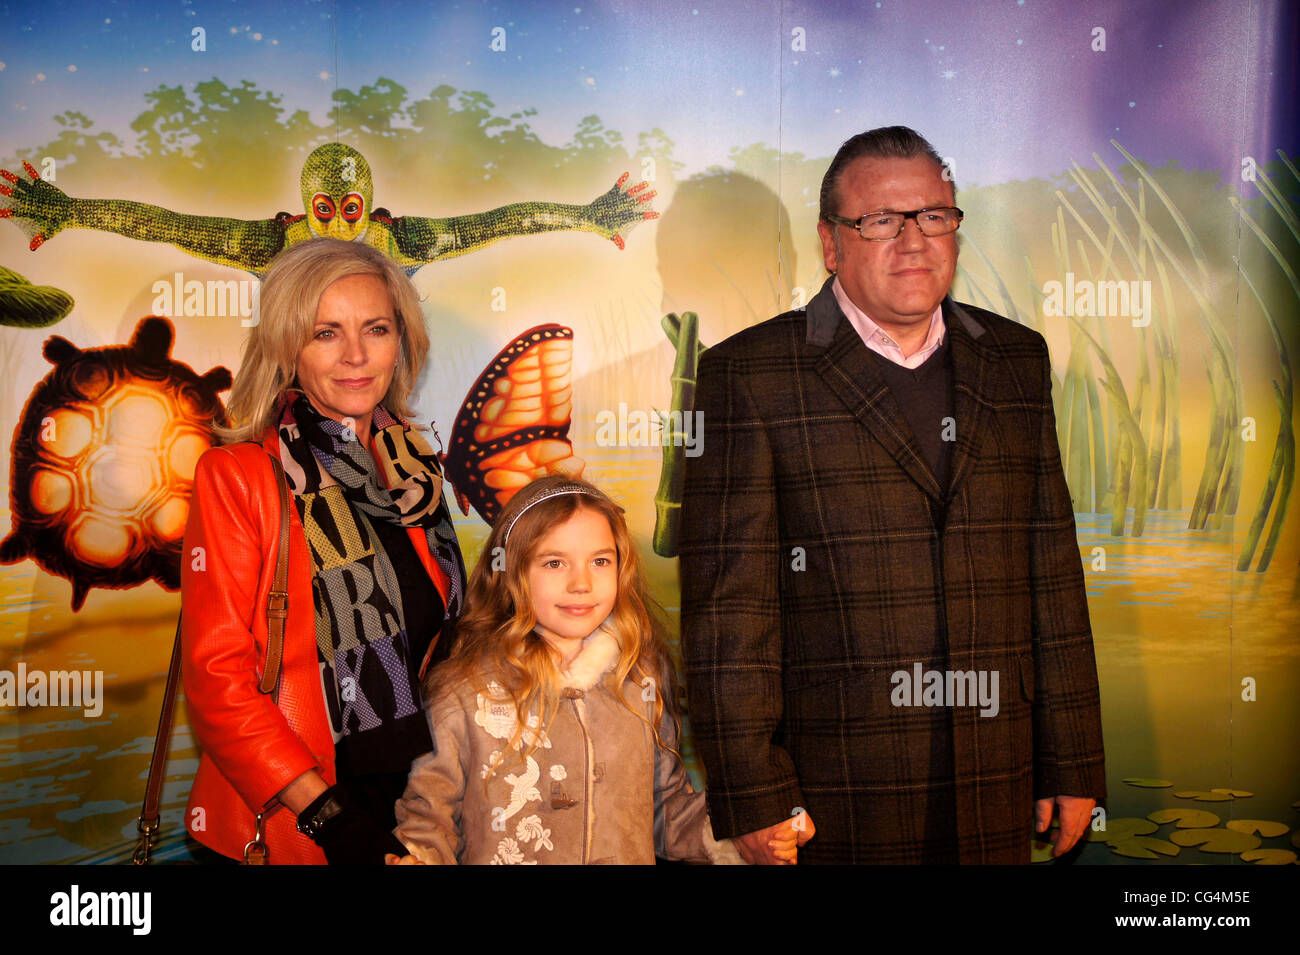 Ray Winstone with his wife Elaine and daughter Ellie Cirque du Soleil UK Premiere of 'Totem' at the Royal Albert Hall - Arrivals London, England - 05.01.11 Stock Photo